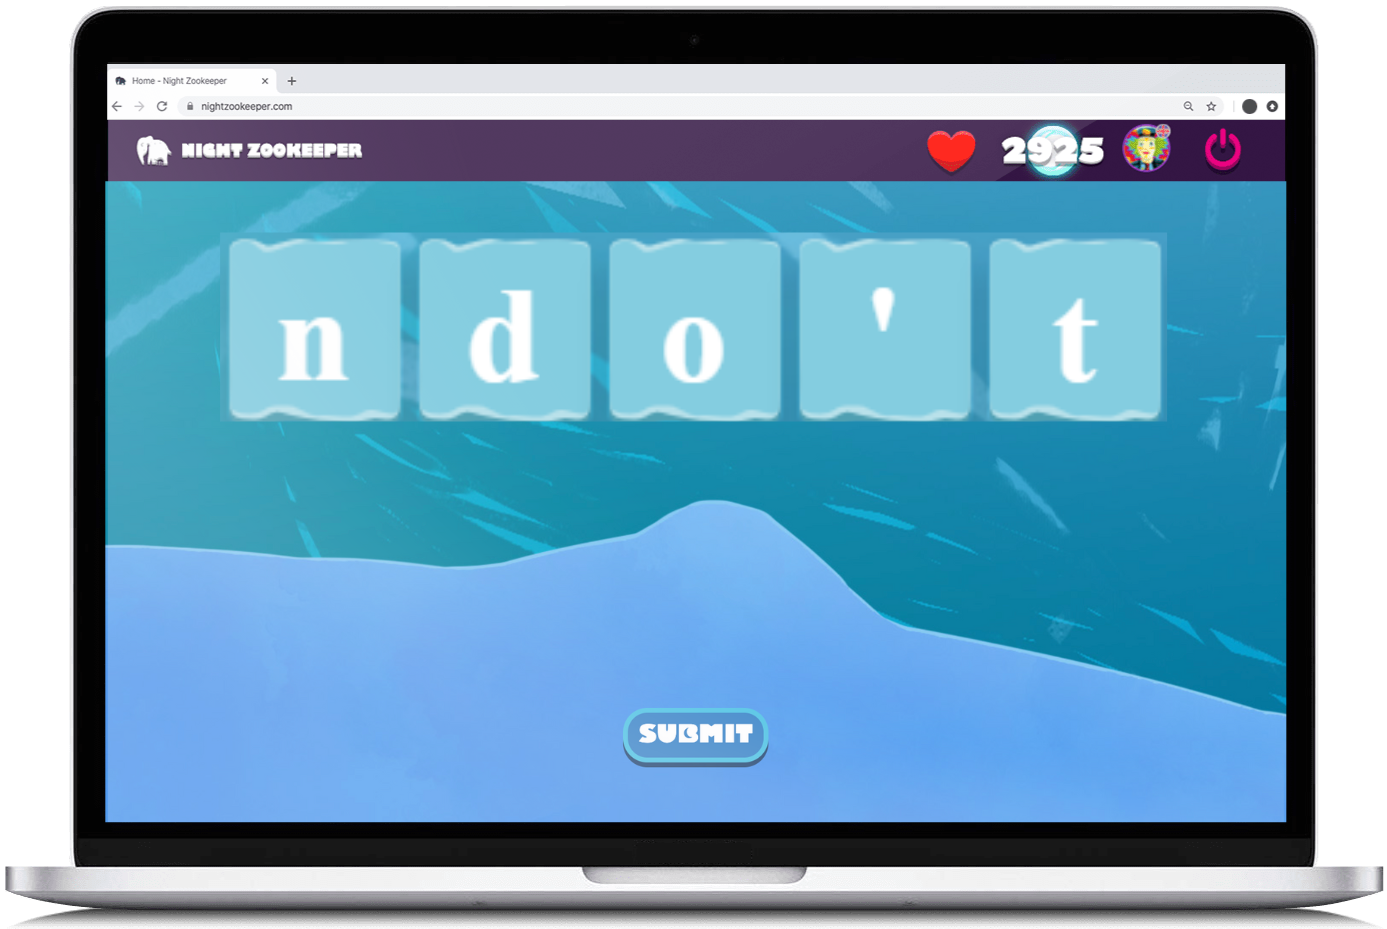 Unscramble the word activity on Nightzookeeper.com, displayed on laptop screen.